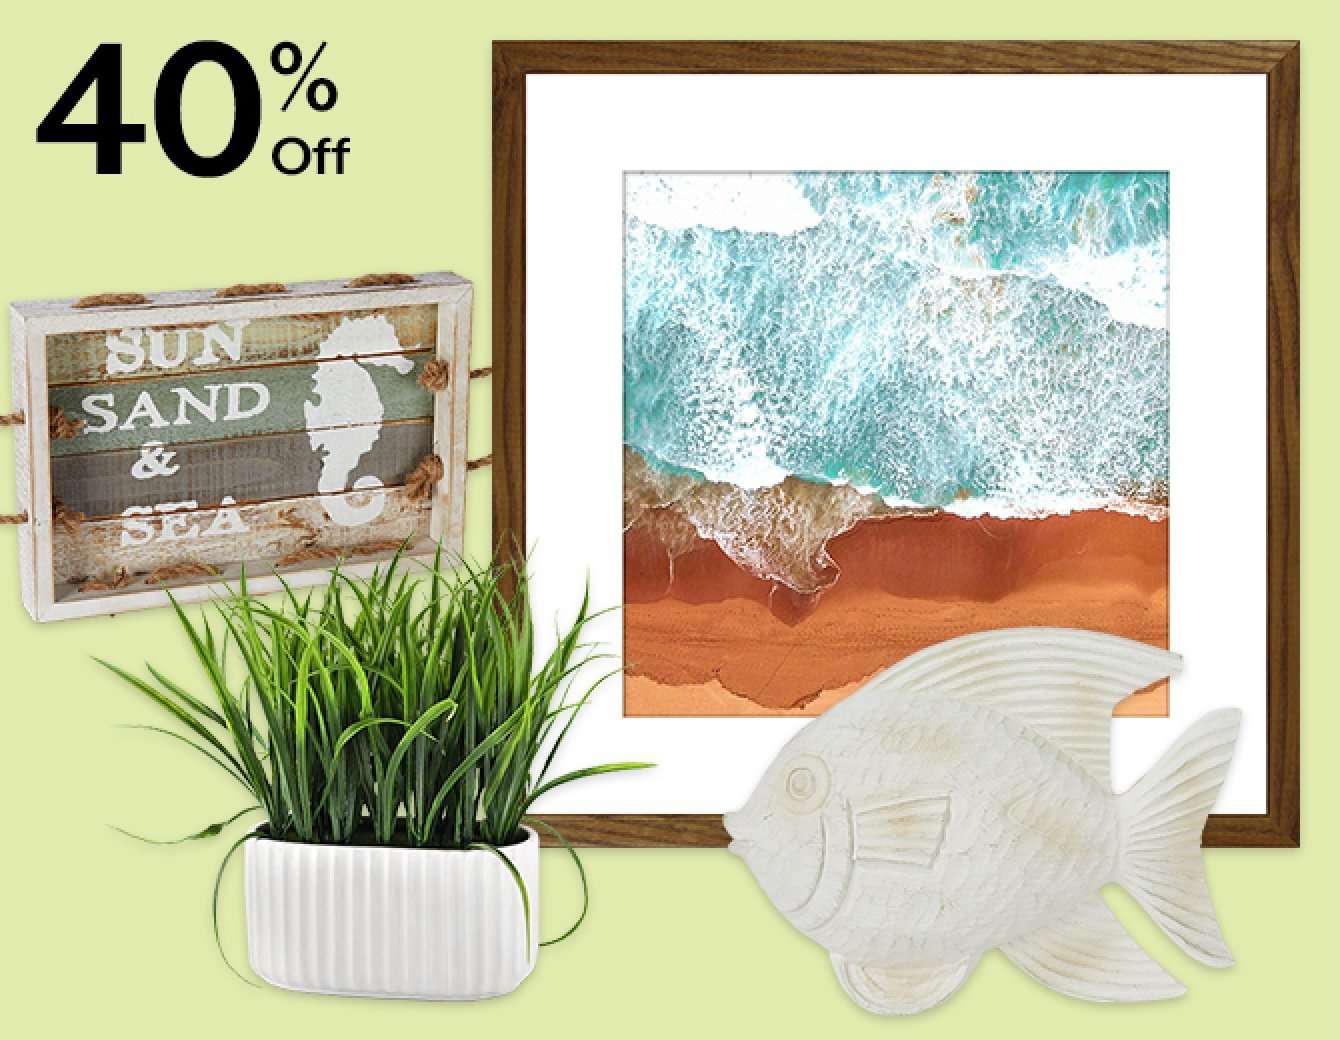 40% off floral, wall & home decor